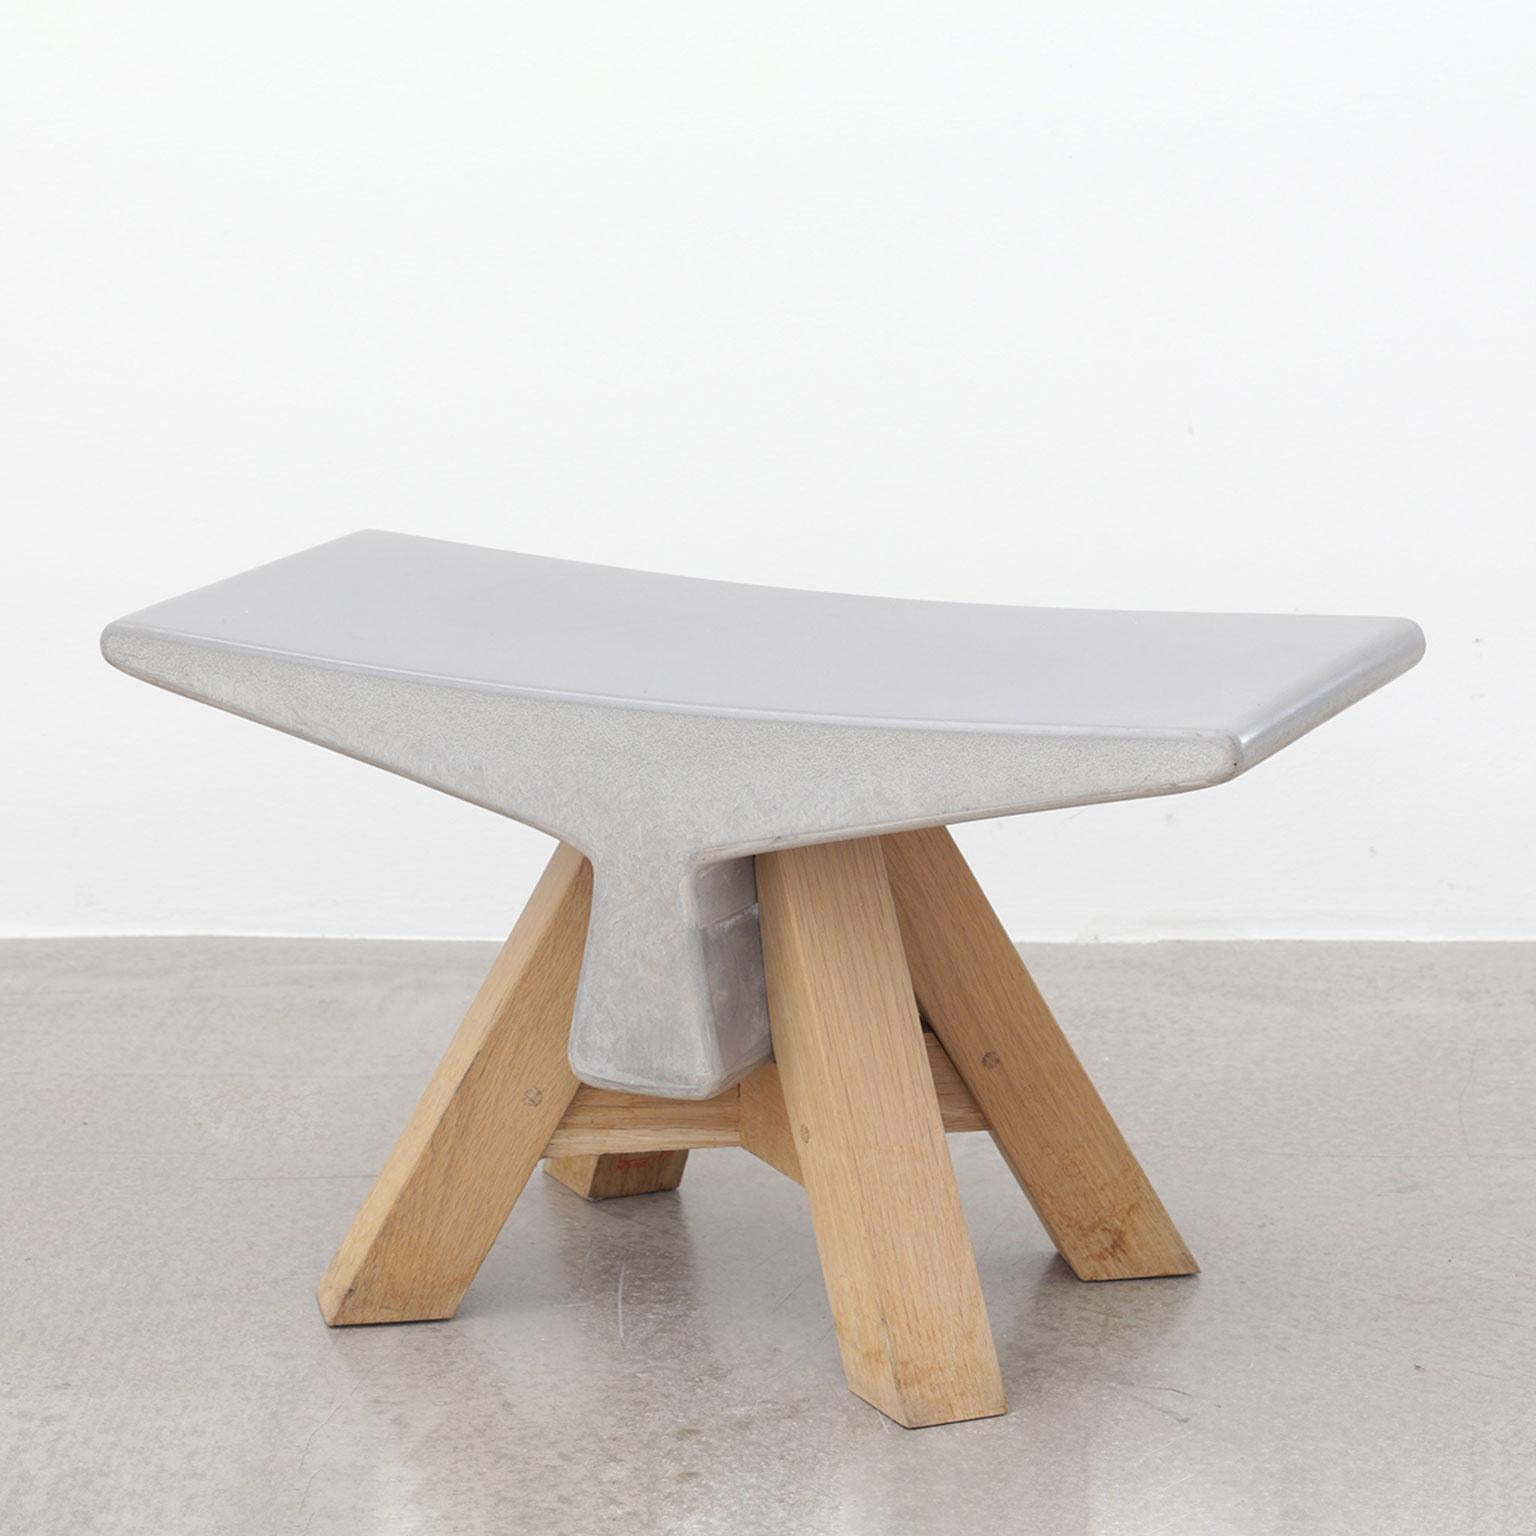 Bone Ductal stool is a step up from its marble version on the evolutionary scale. Convoking the timeless, aspiring to meditation, the Bone uses archetypes, half-way between an Asian neck-support and a Japanese torii. This simply designed seat hides